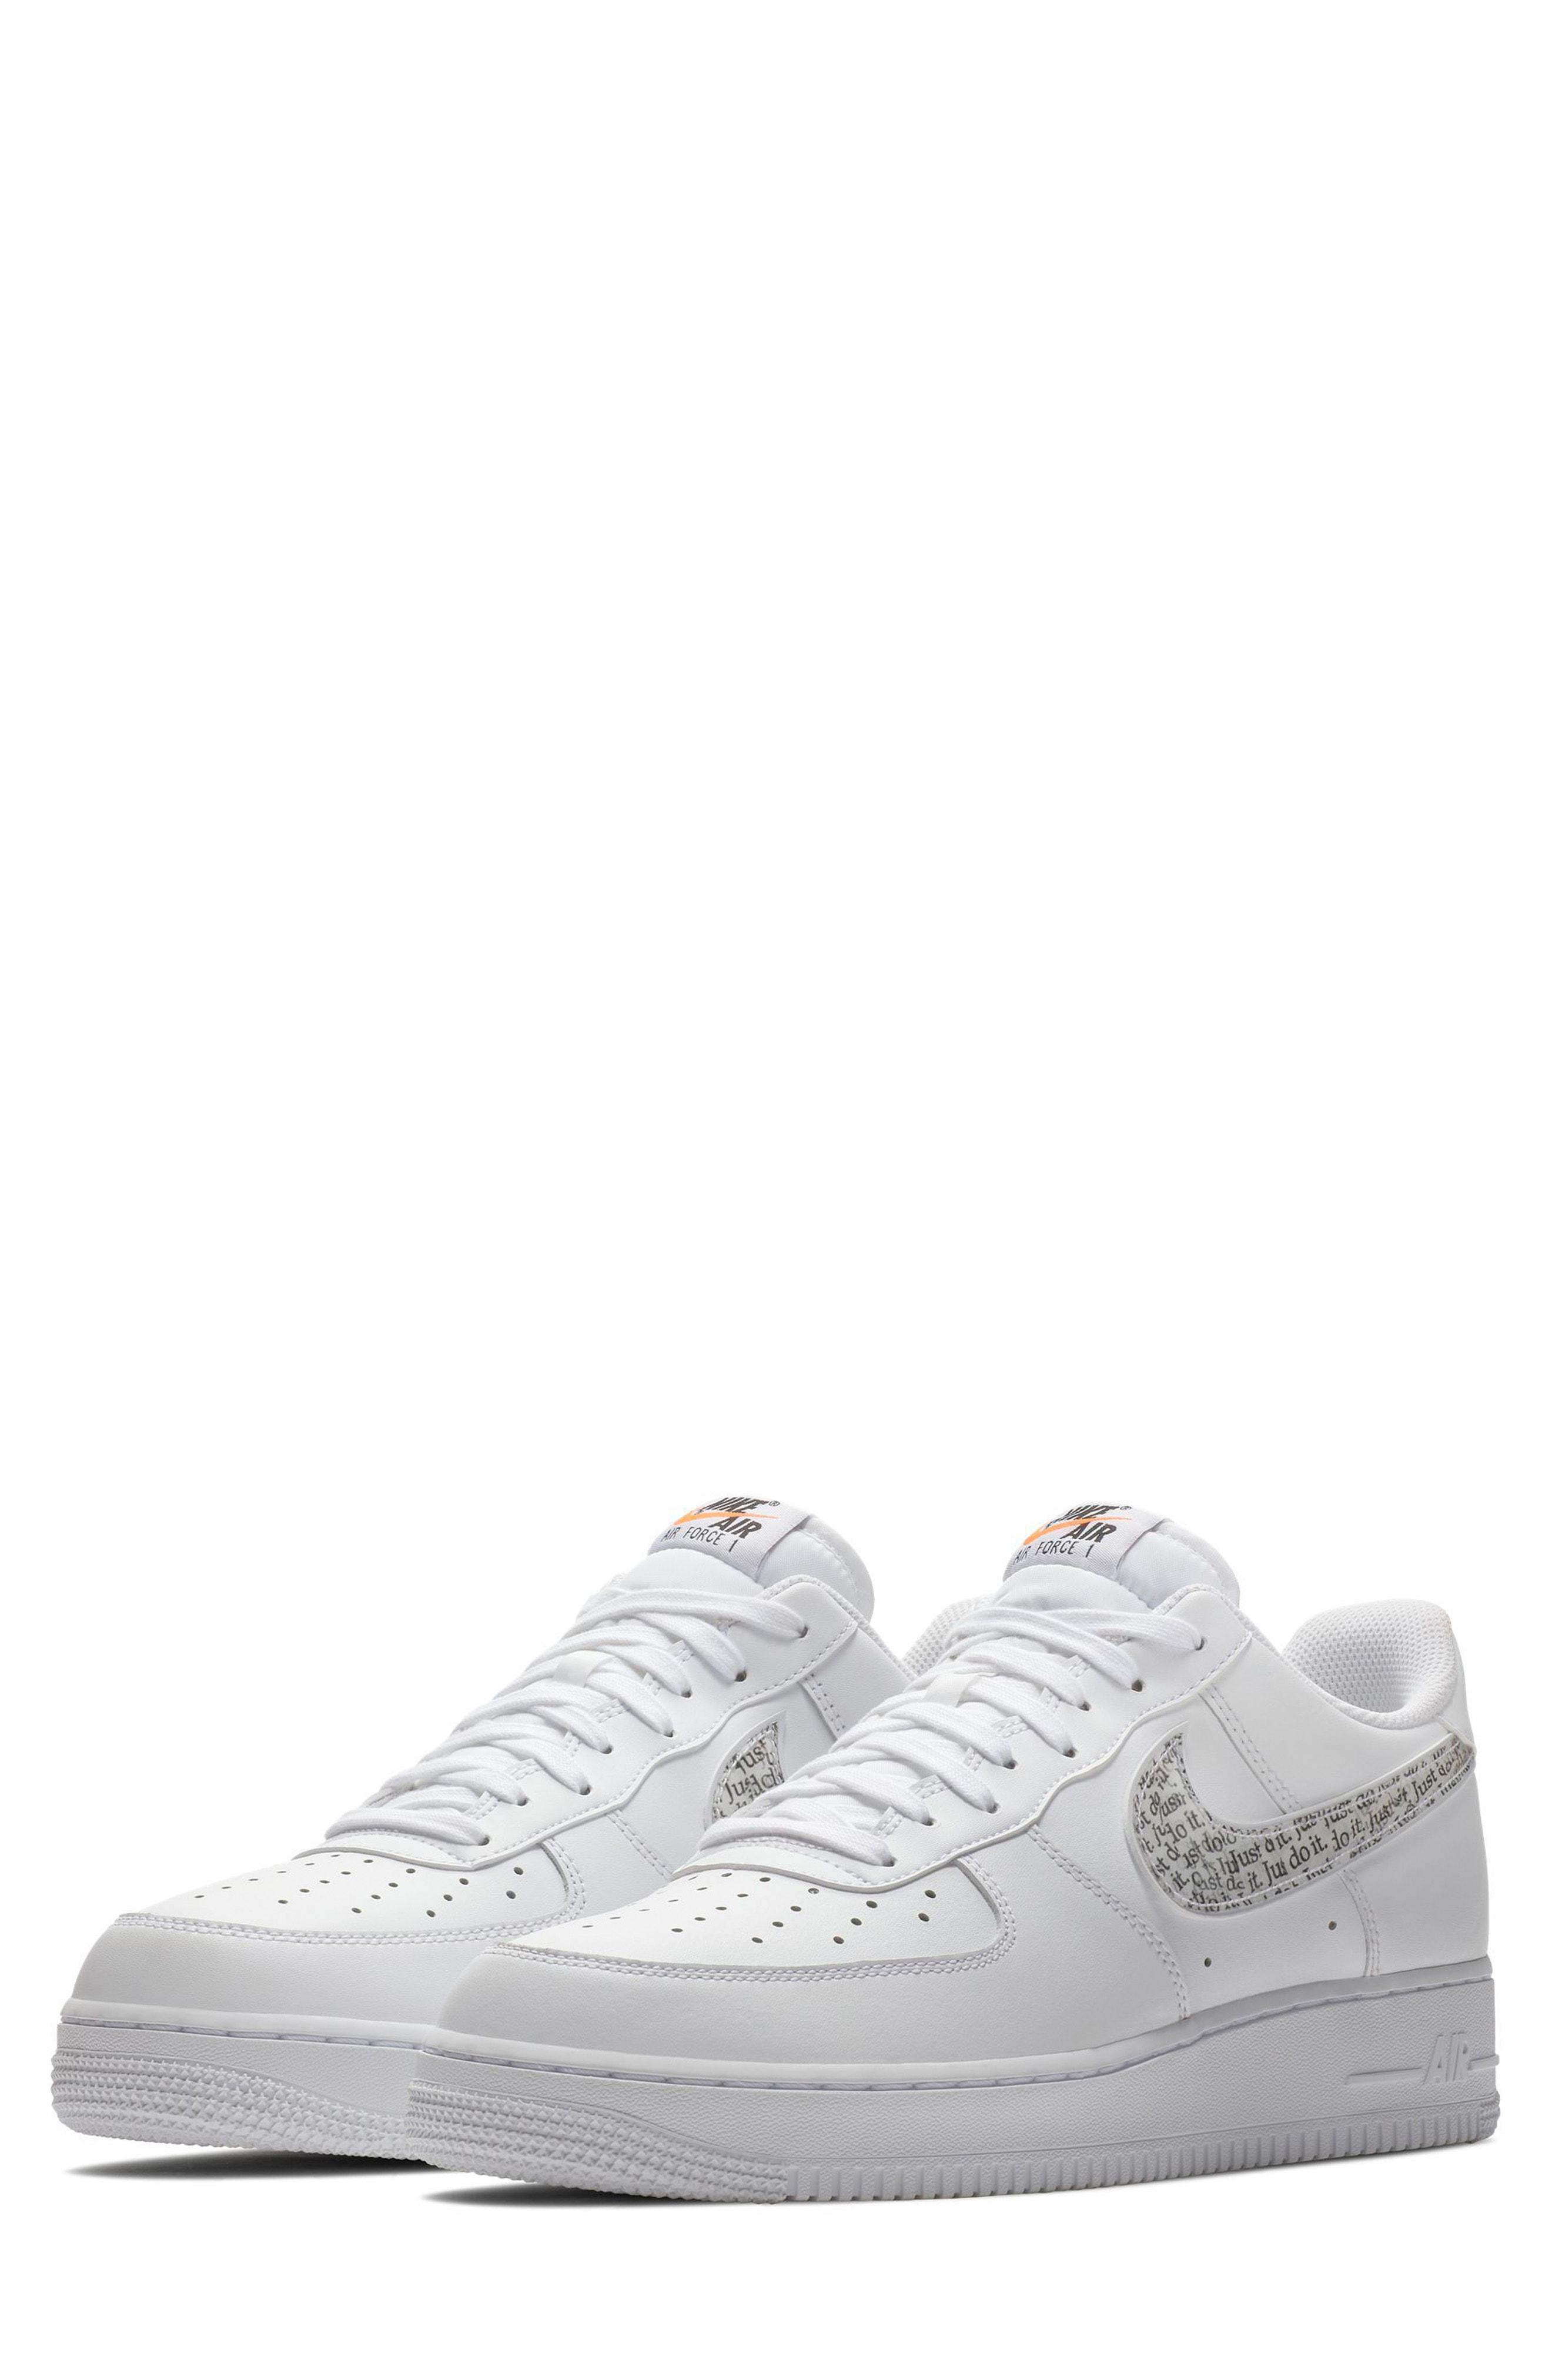 nike air force lv8 just do it